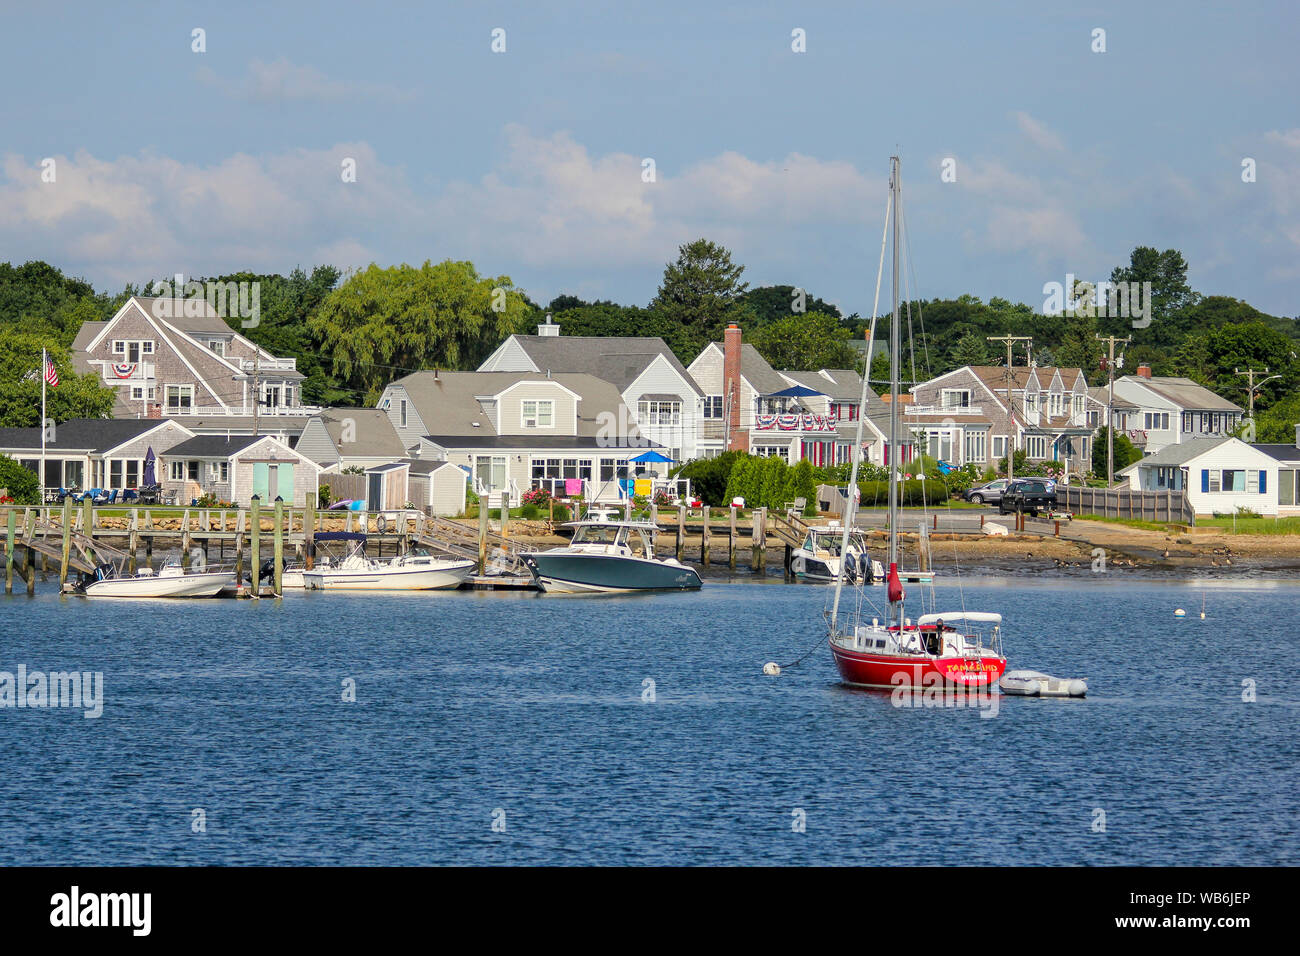 A view of boats and waterfront homes from Lewis Bay, Hyannis, Cape Cod, Massachusetts, United States Stock Photo